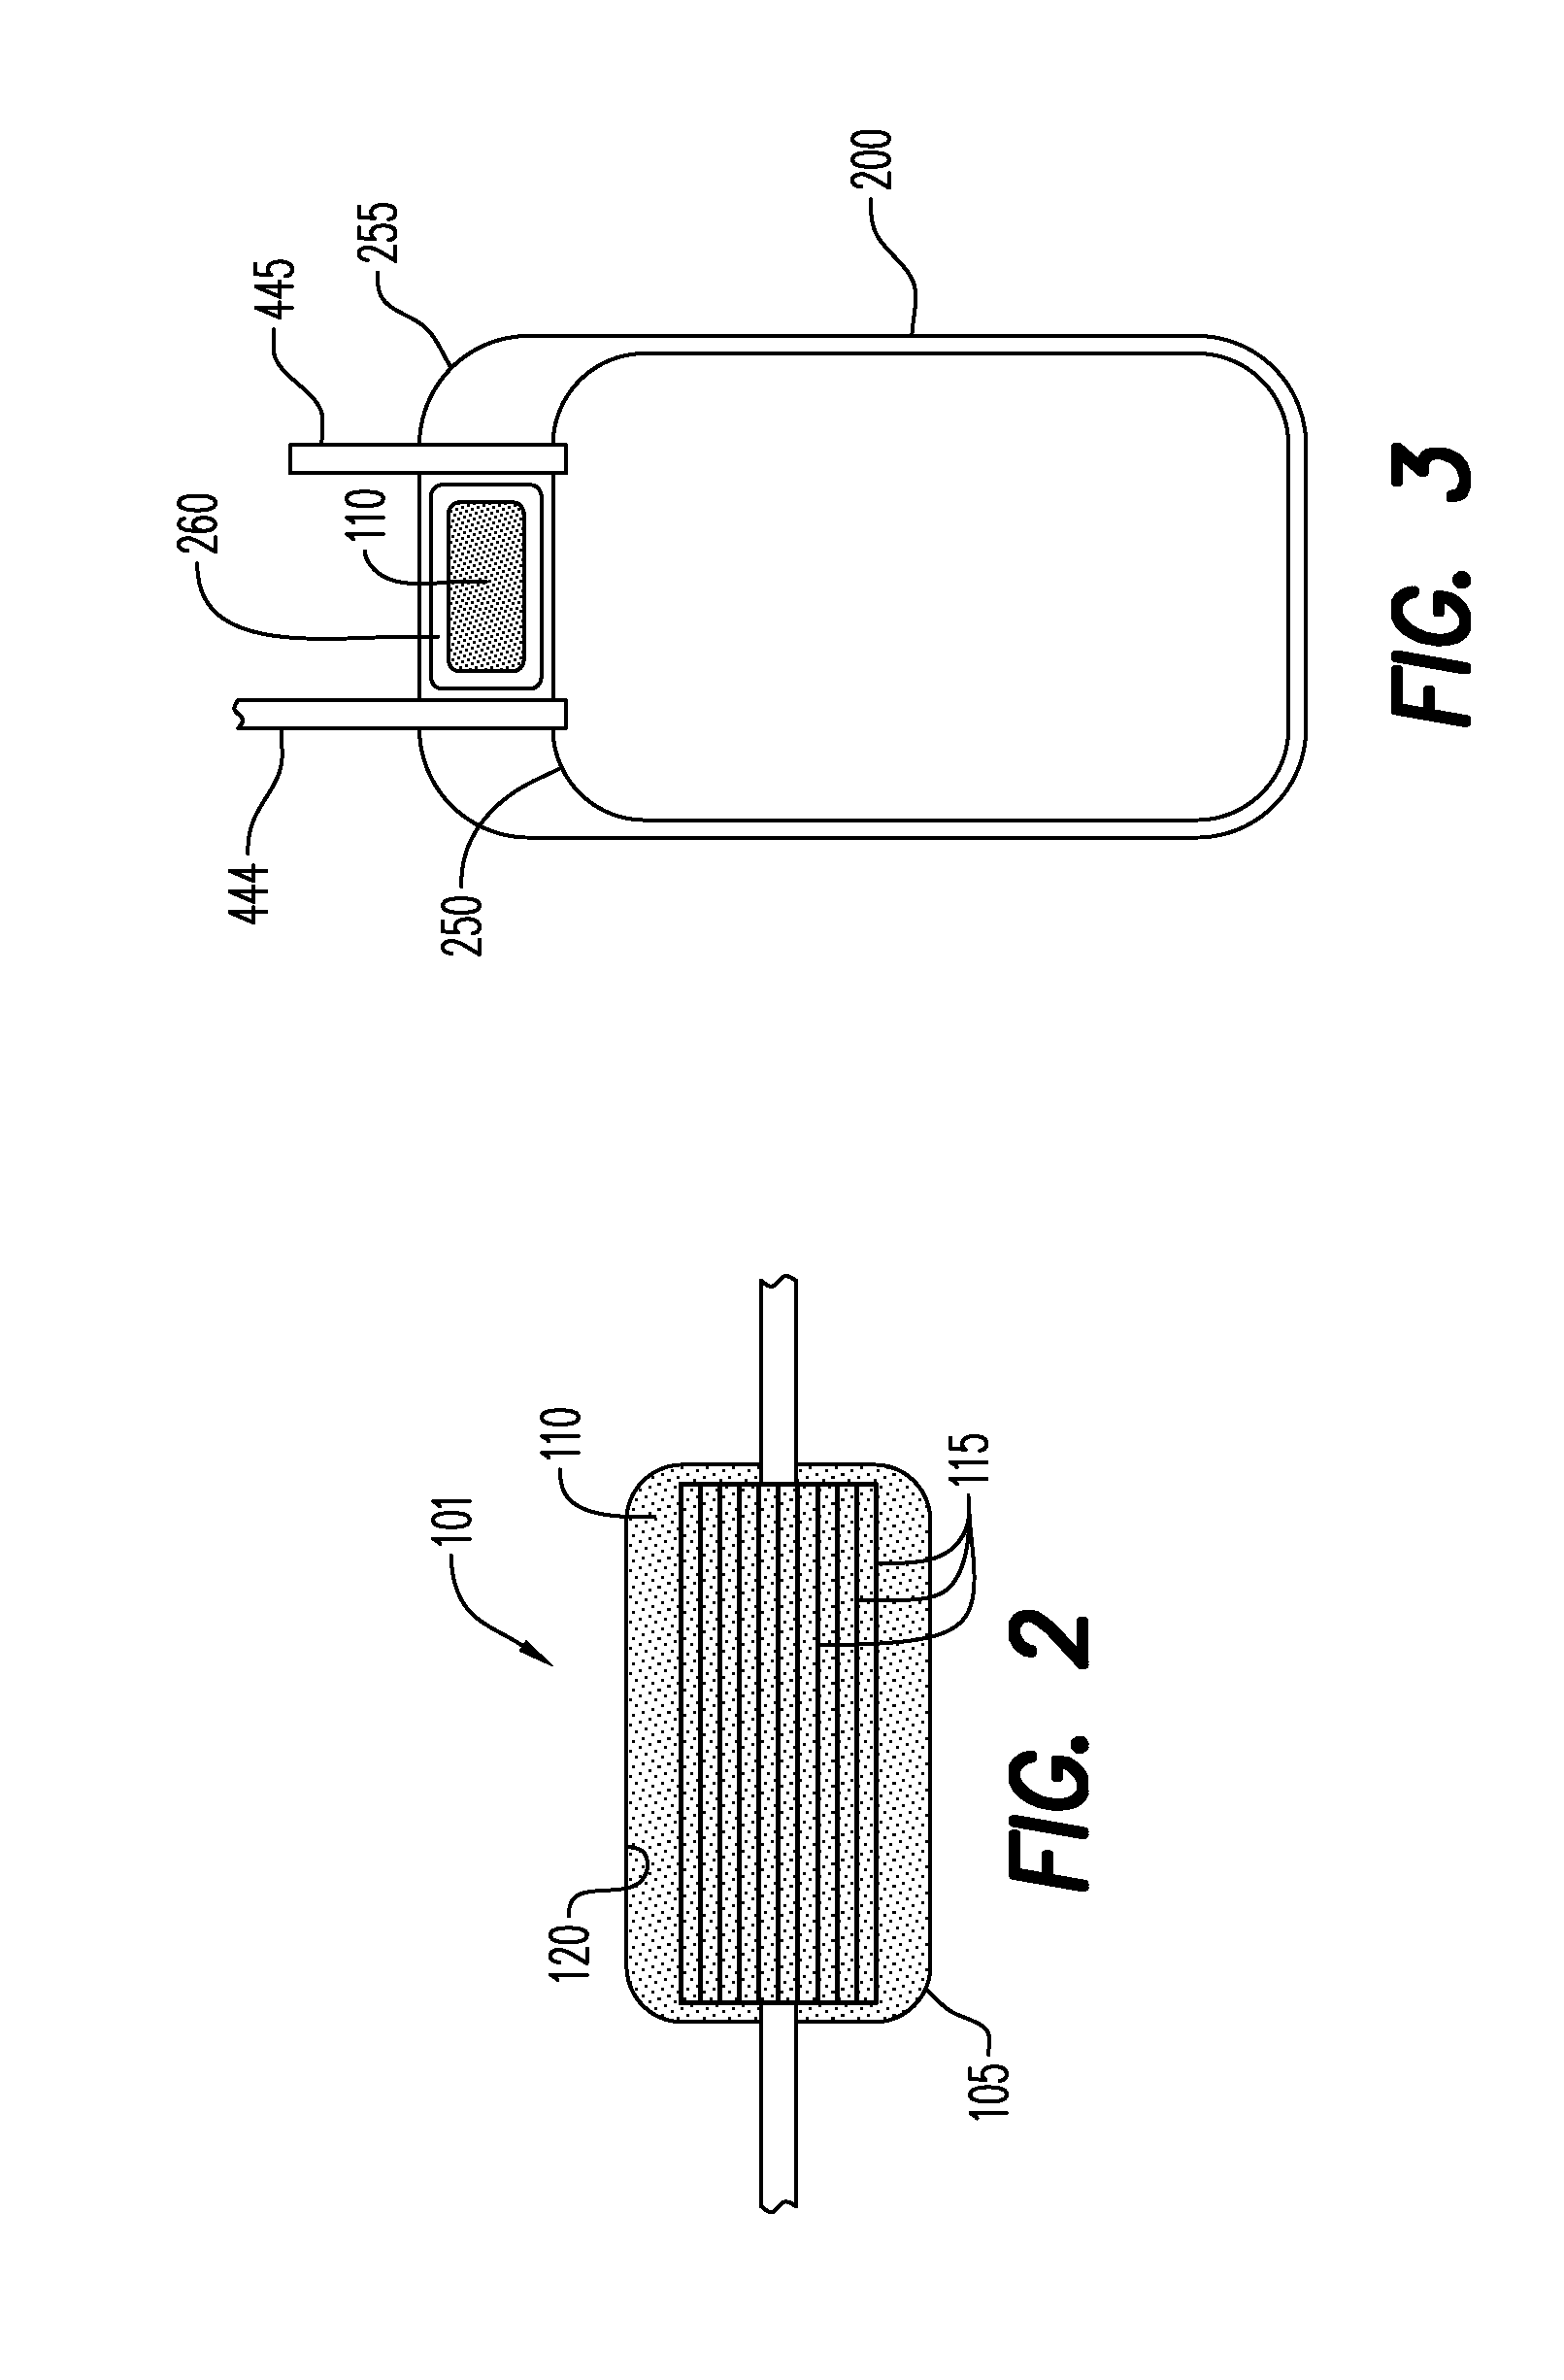 Blood storage bag system and depletion devices with oxygen and carbon dioxide depletion capabilities